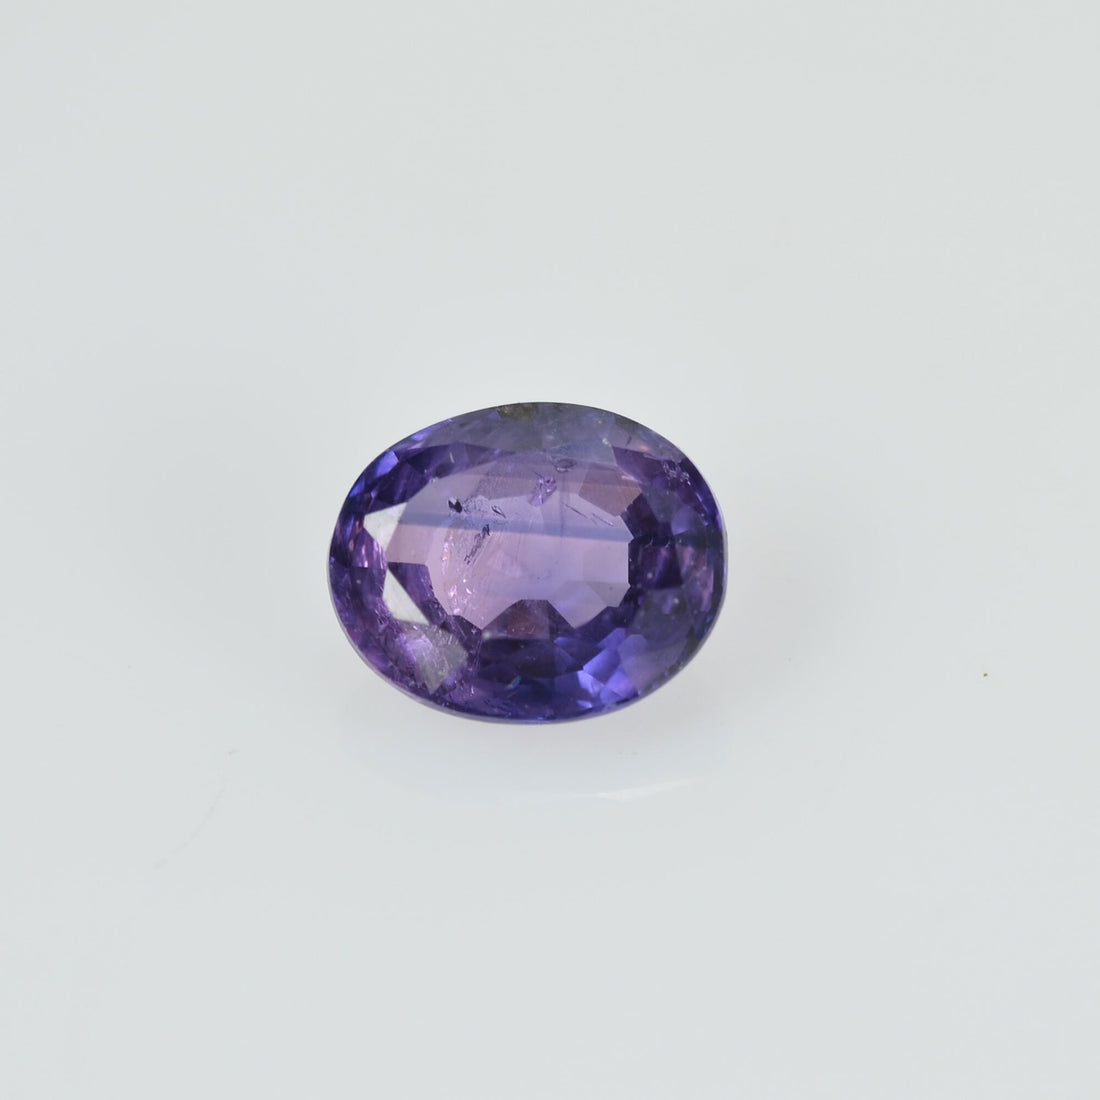 0.43 cts Natural Lavender Sapphire Loose Gemstone Oval Cut